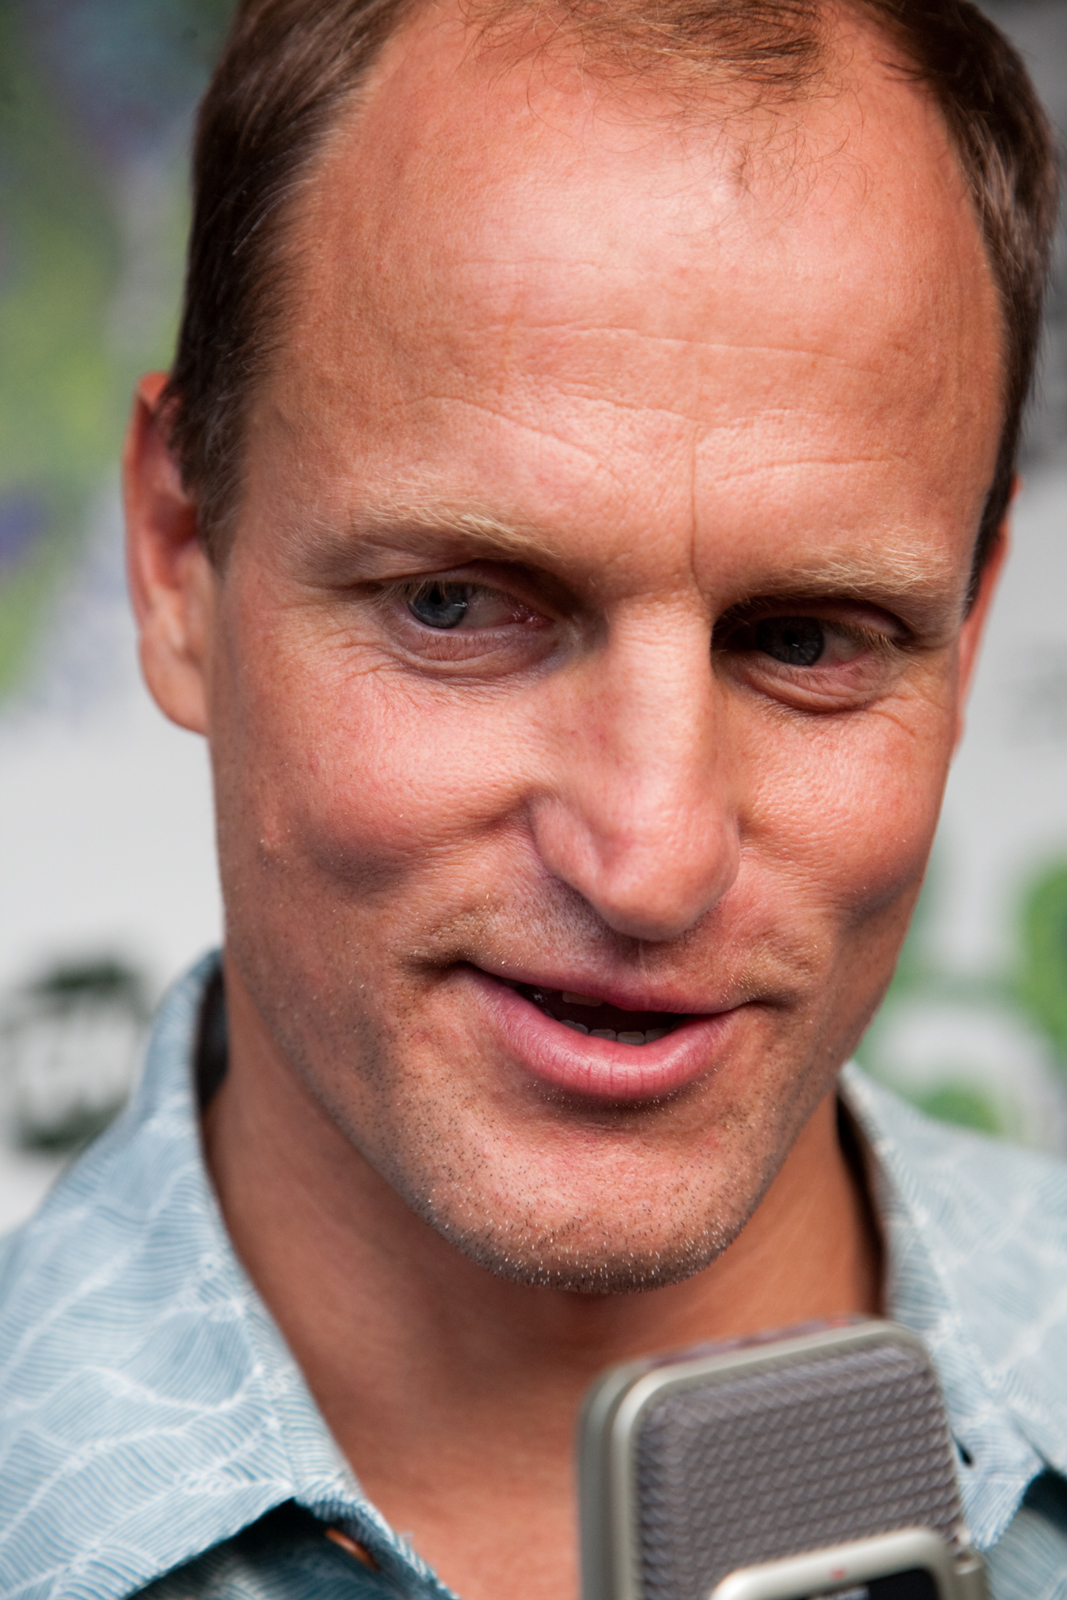 Is Champions starring Woody Harrelson on Netflix? (where to watch)